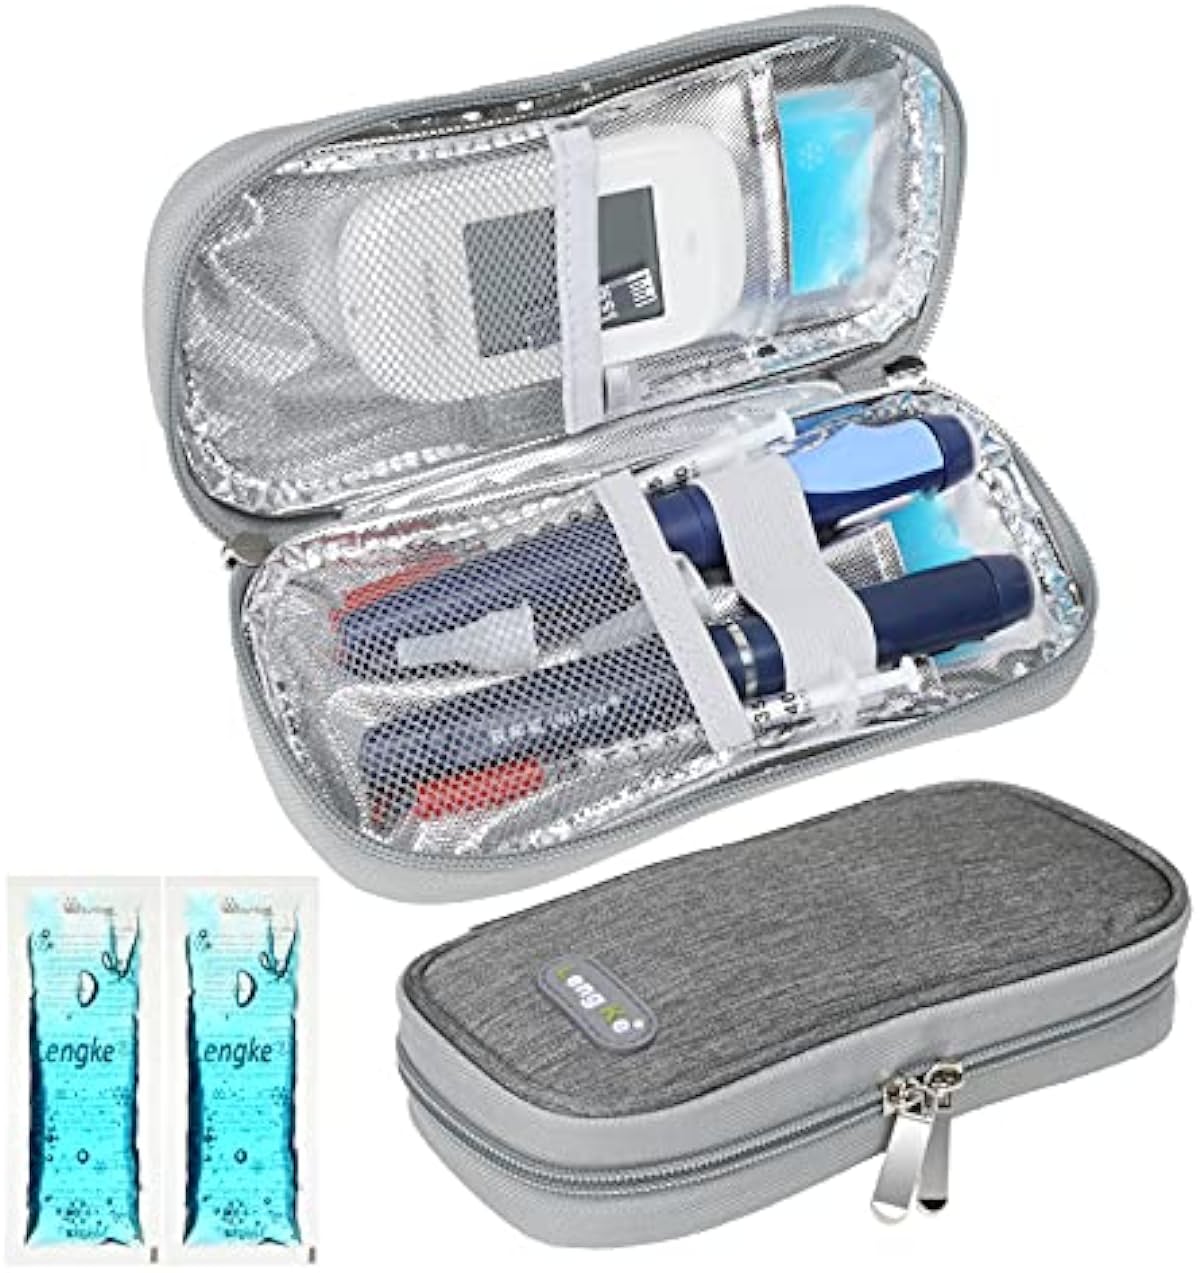 Insulin Cooler Travel Case with 2 Ice Packs - Diabetes Bags Cooler Travel Case for Diabetic Organize Supplies Insulated Cooling Bag by YOUSHARES (Gray)